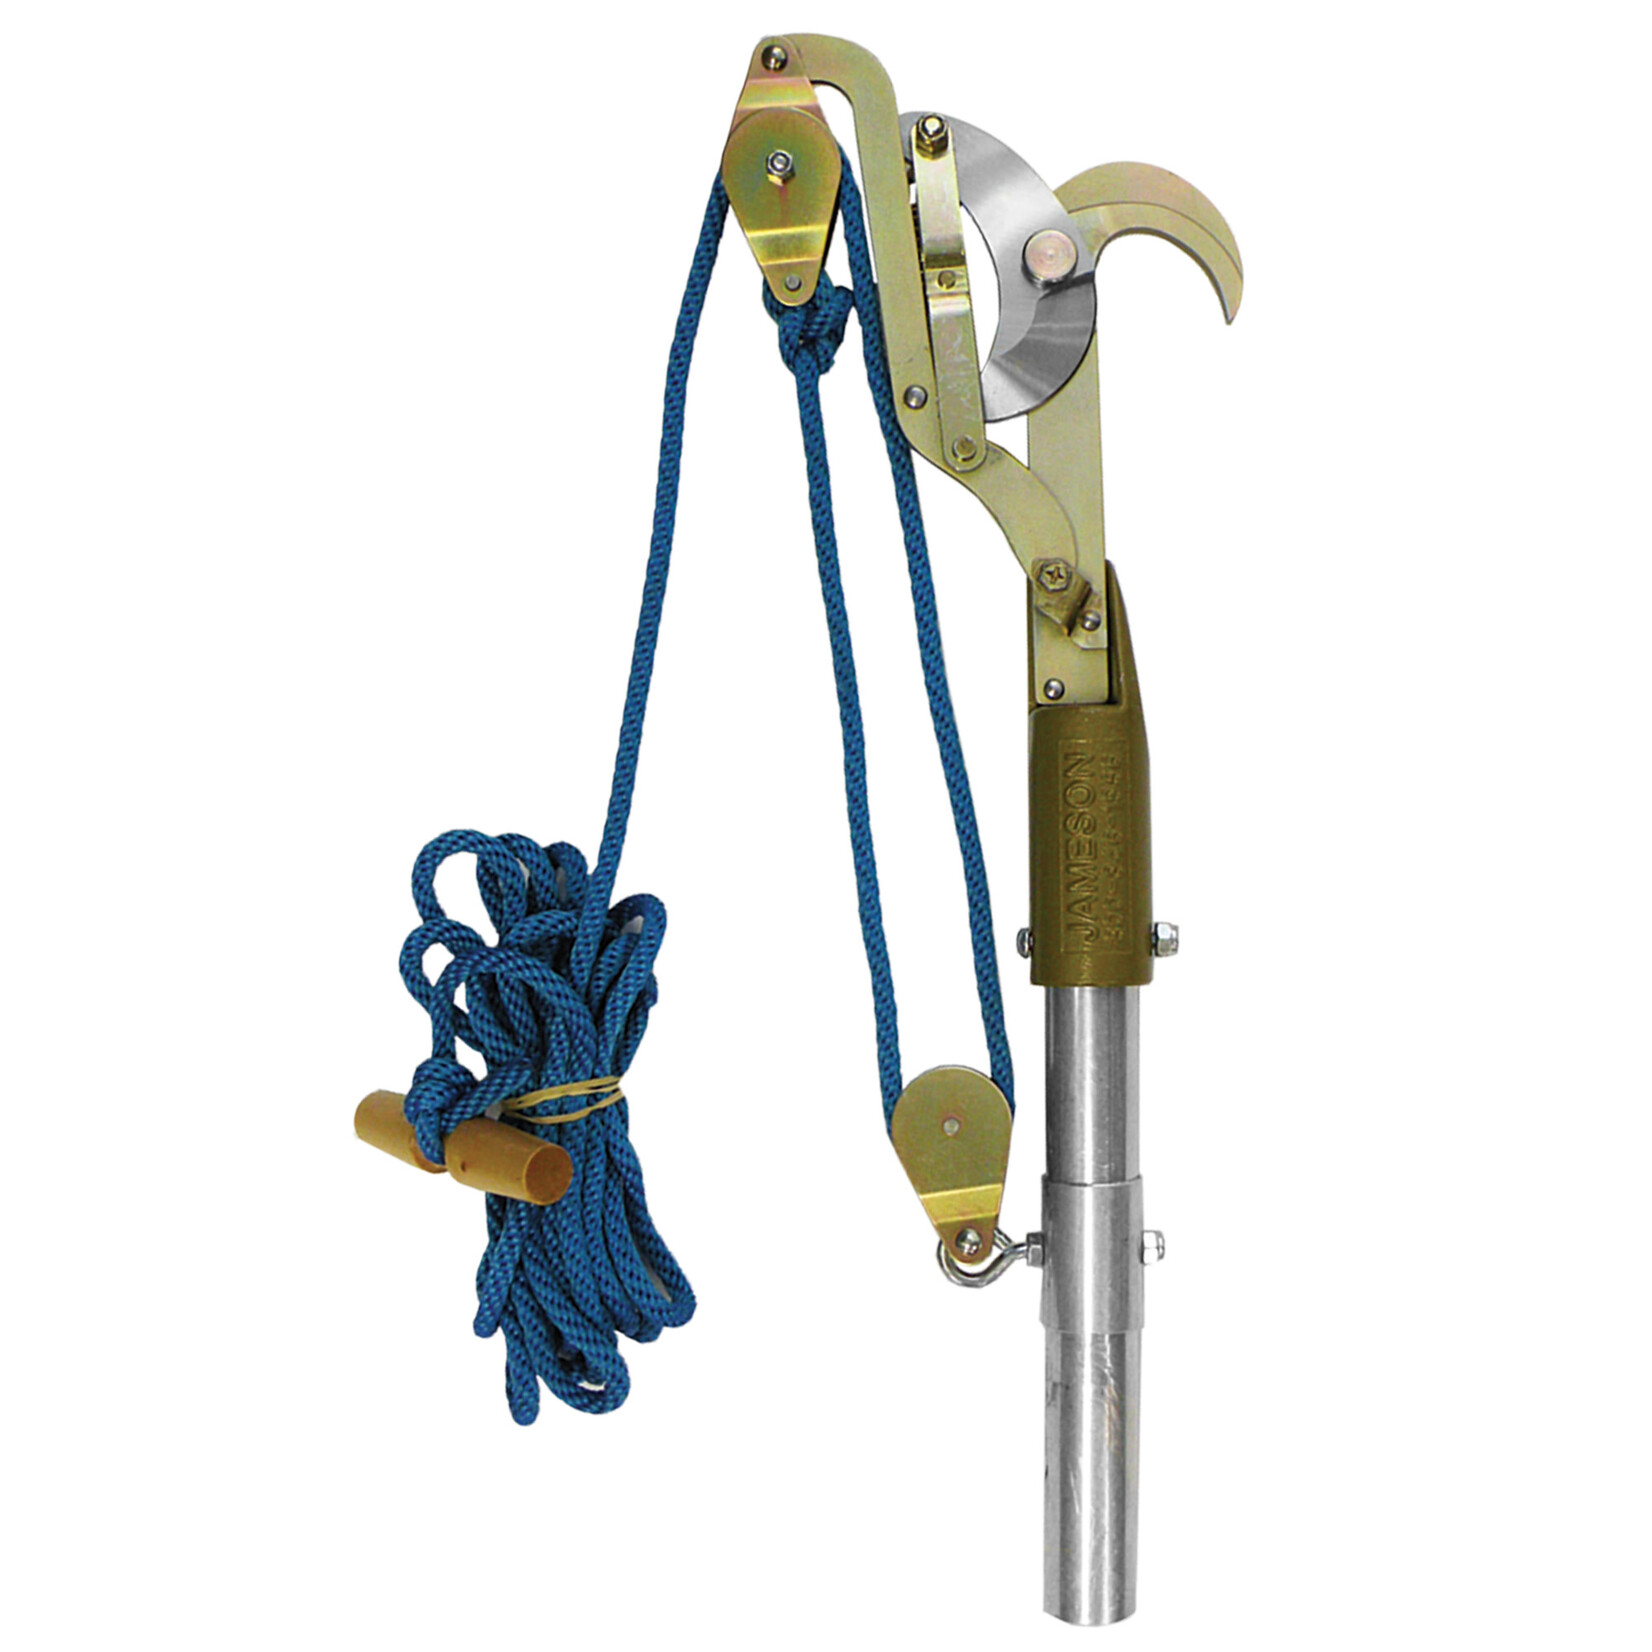 Jameson Big Mouth Pruner With Double Pulley, Adapter And Rope